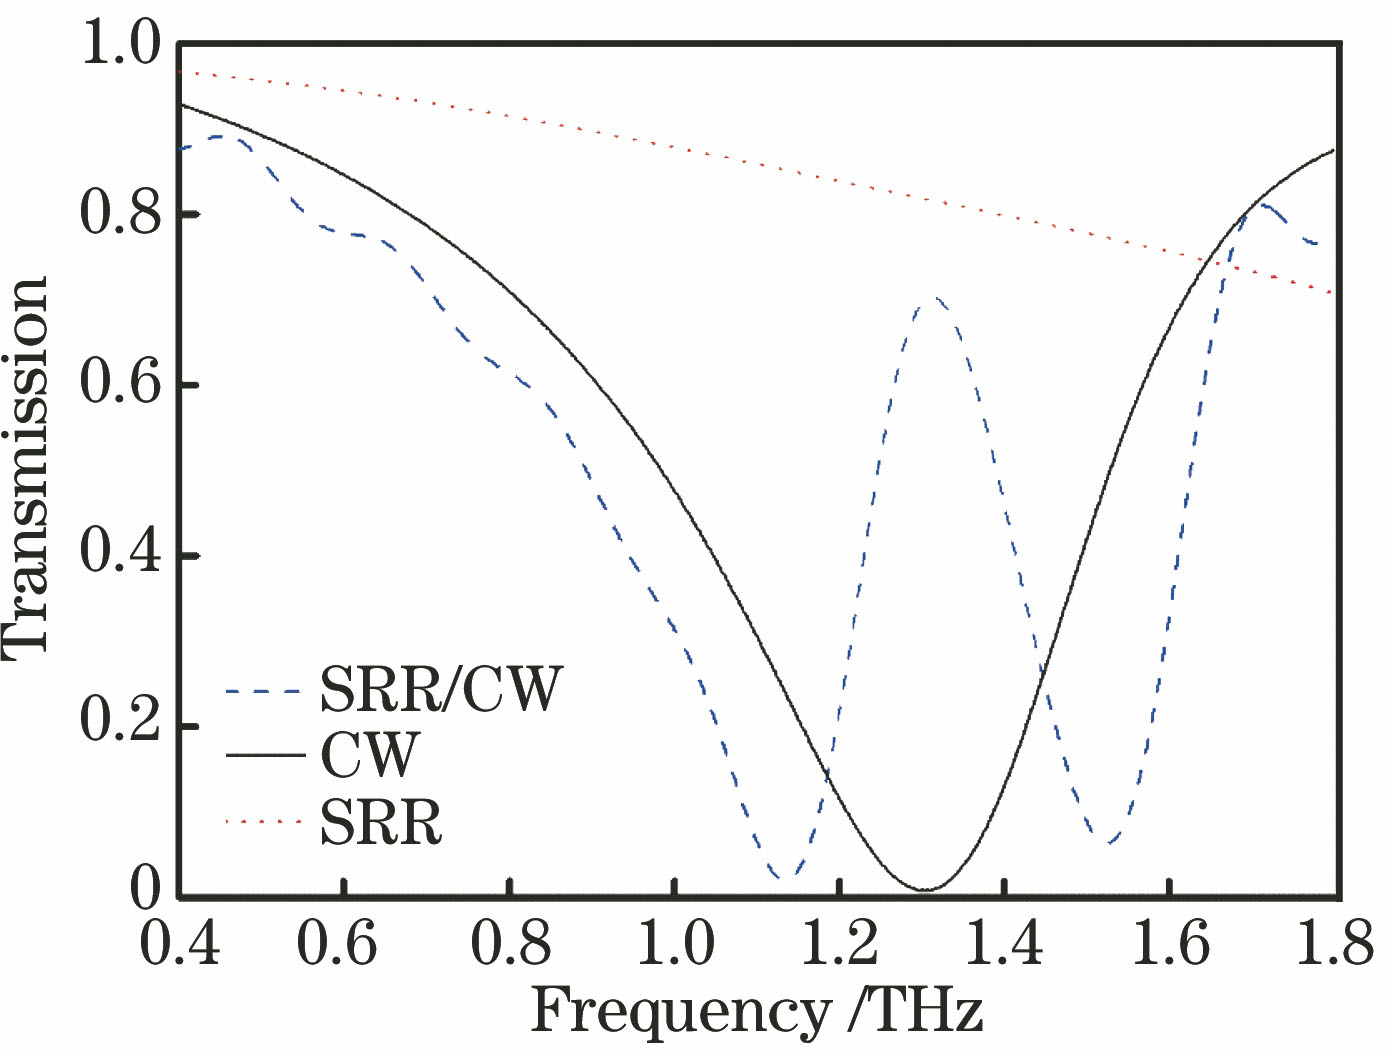 Transmission spectra of CW, SRR and SRR/CW structures